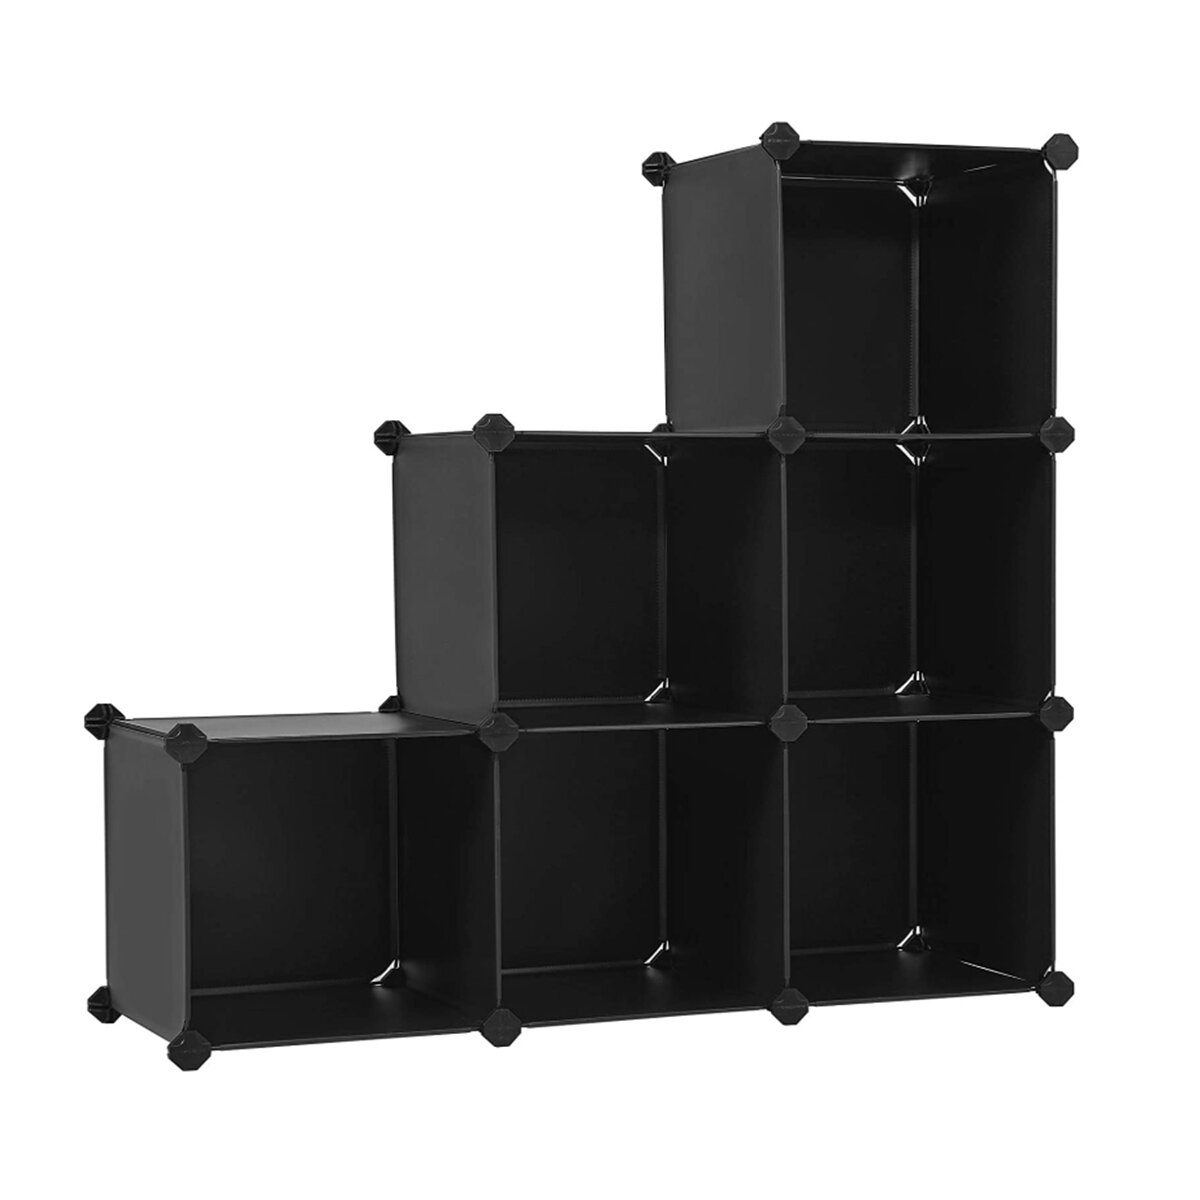 3-Tier Children's Free Combination Bookshelf Simple and Modern Style for Home Office